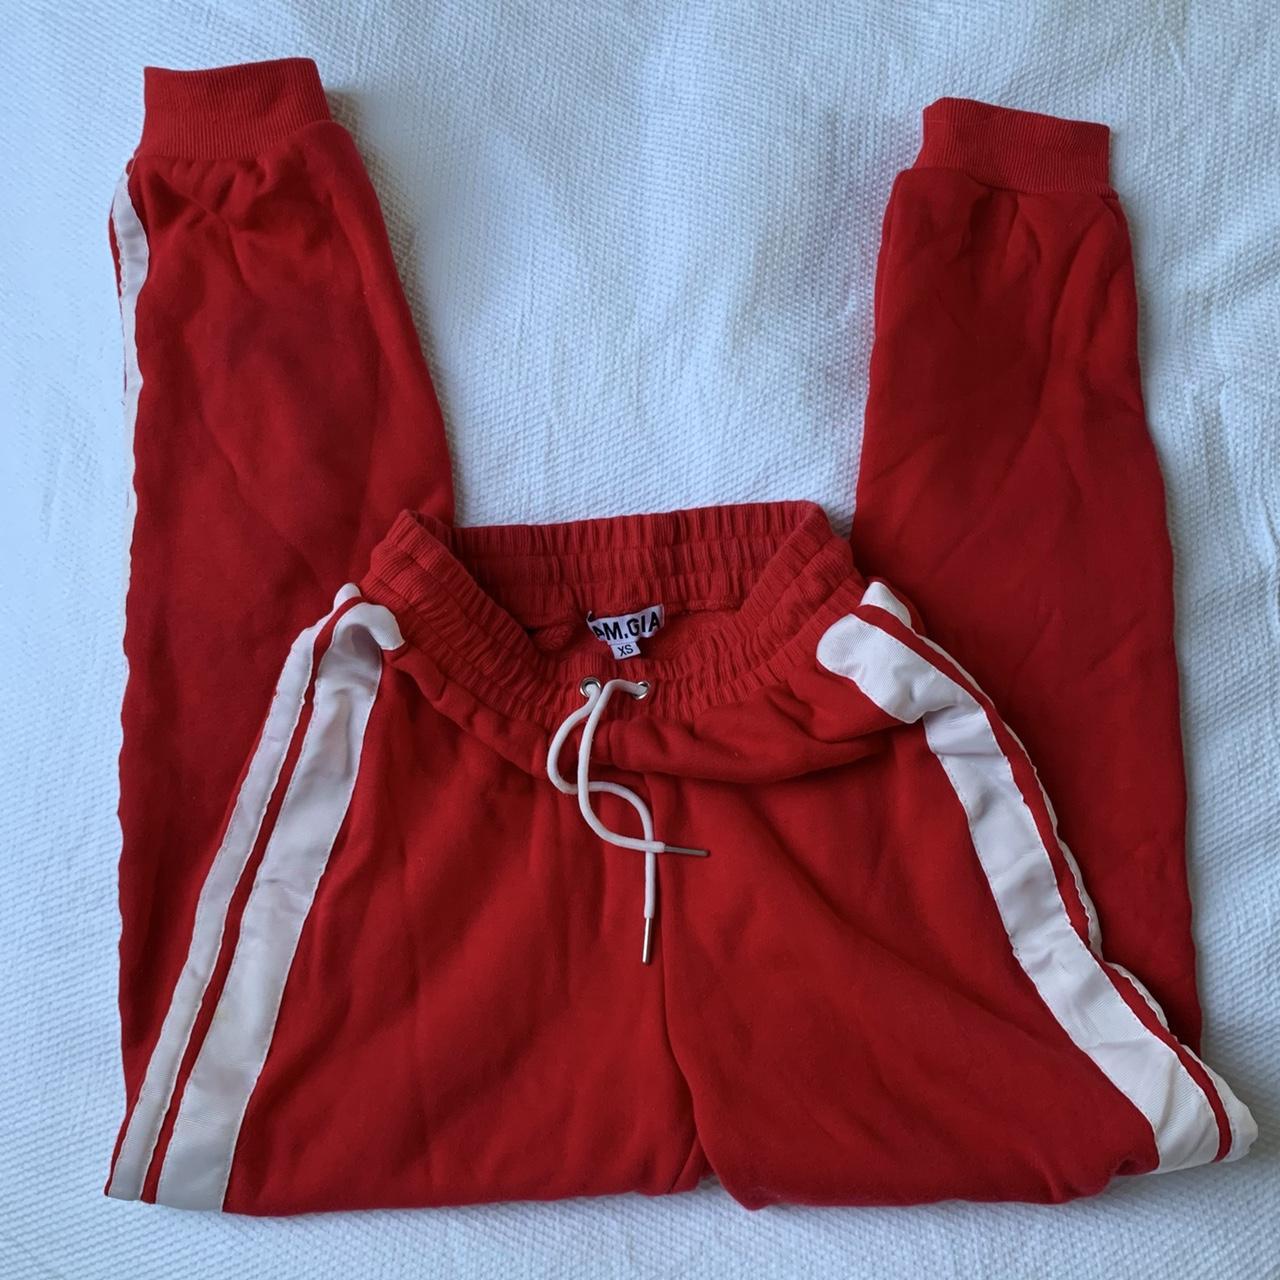 I.AM.GIA Women's Red and White Joggers-tracksuits | Depop